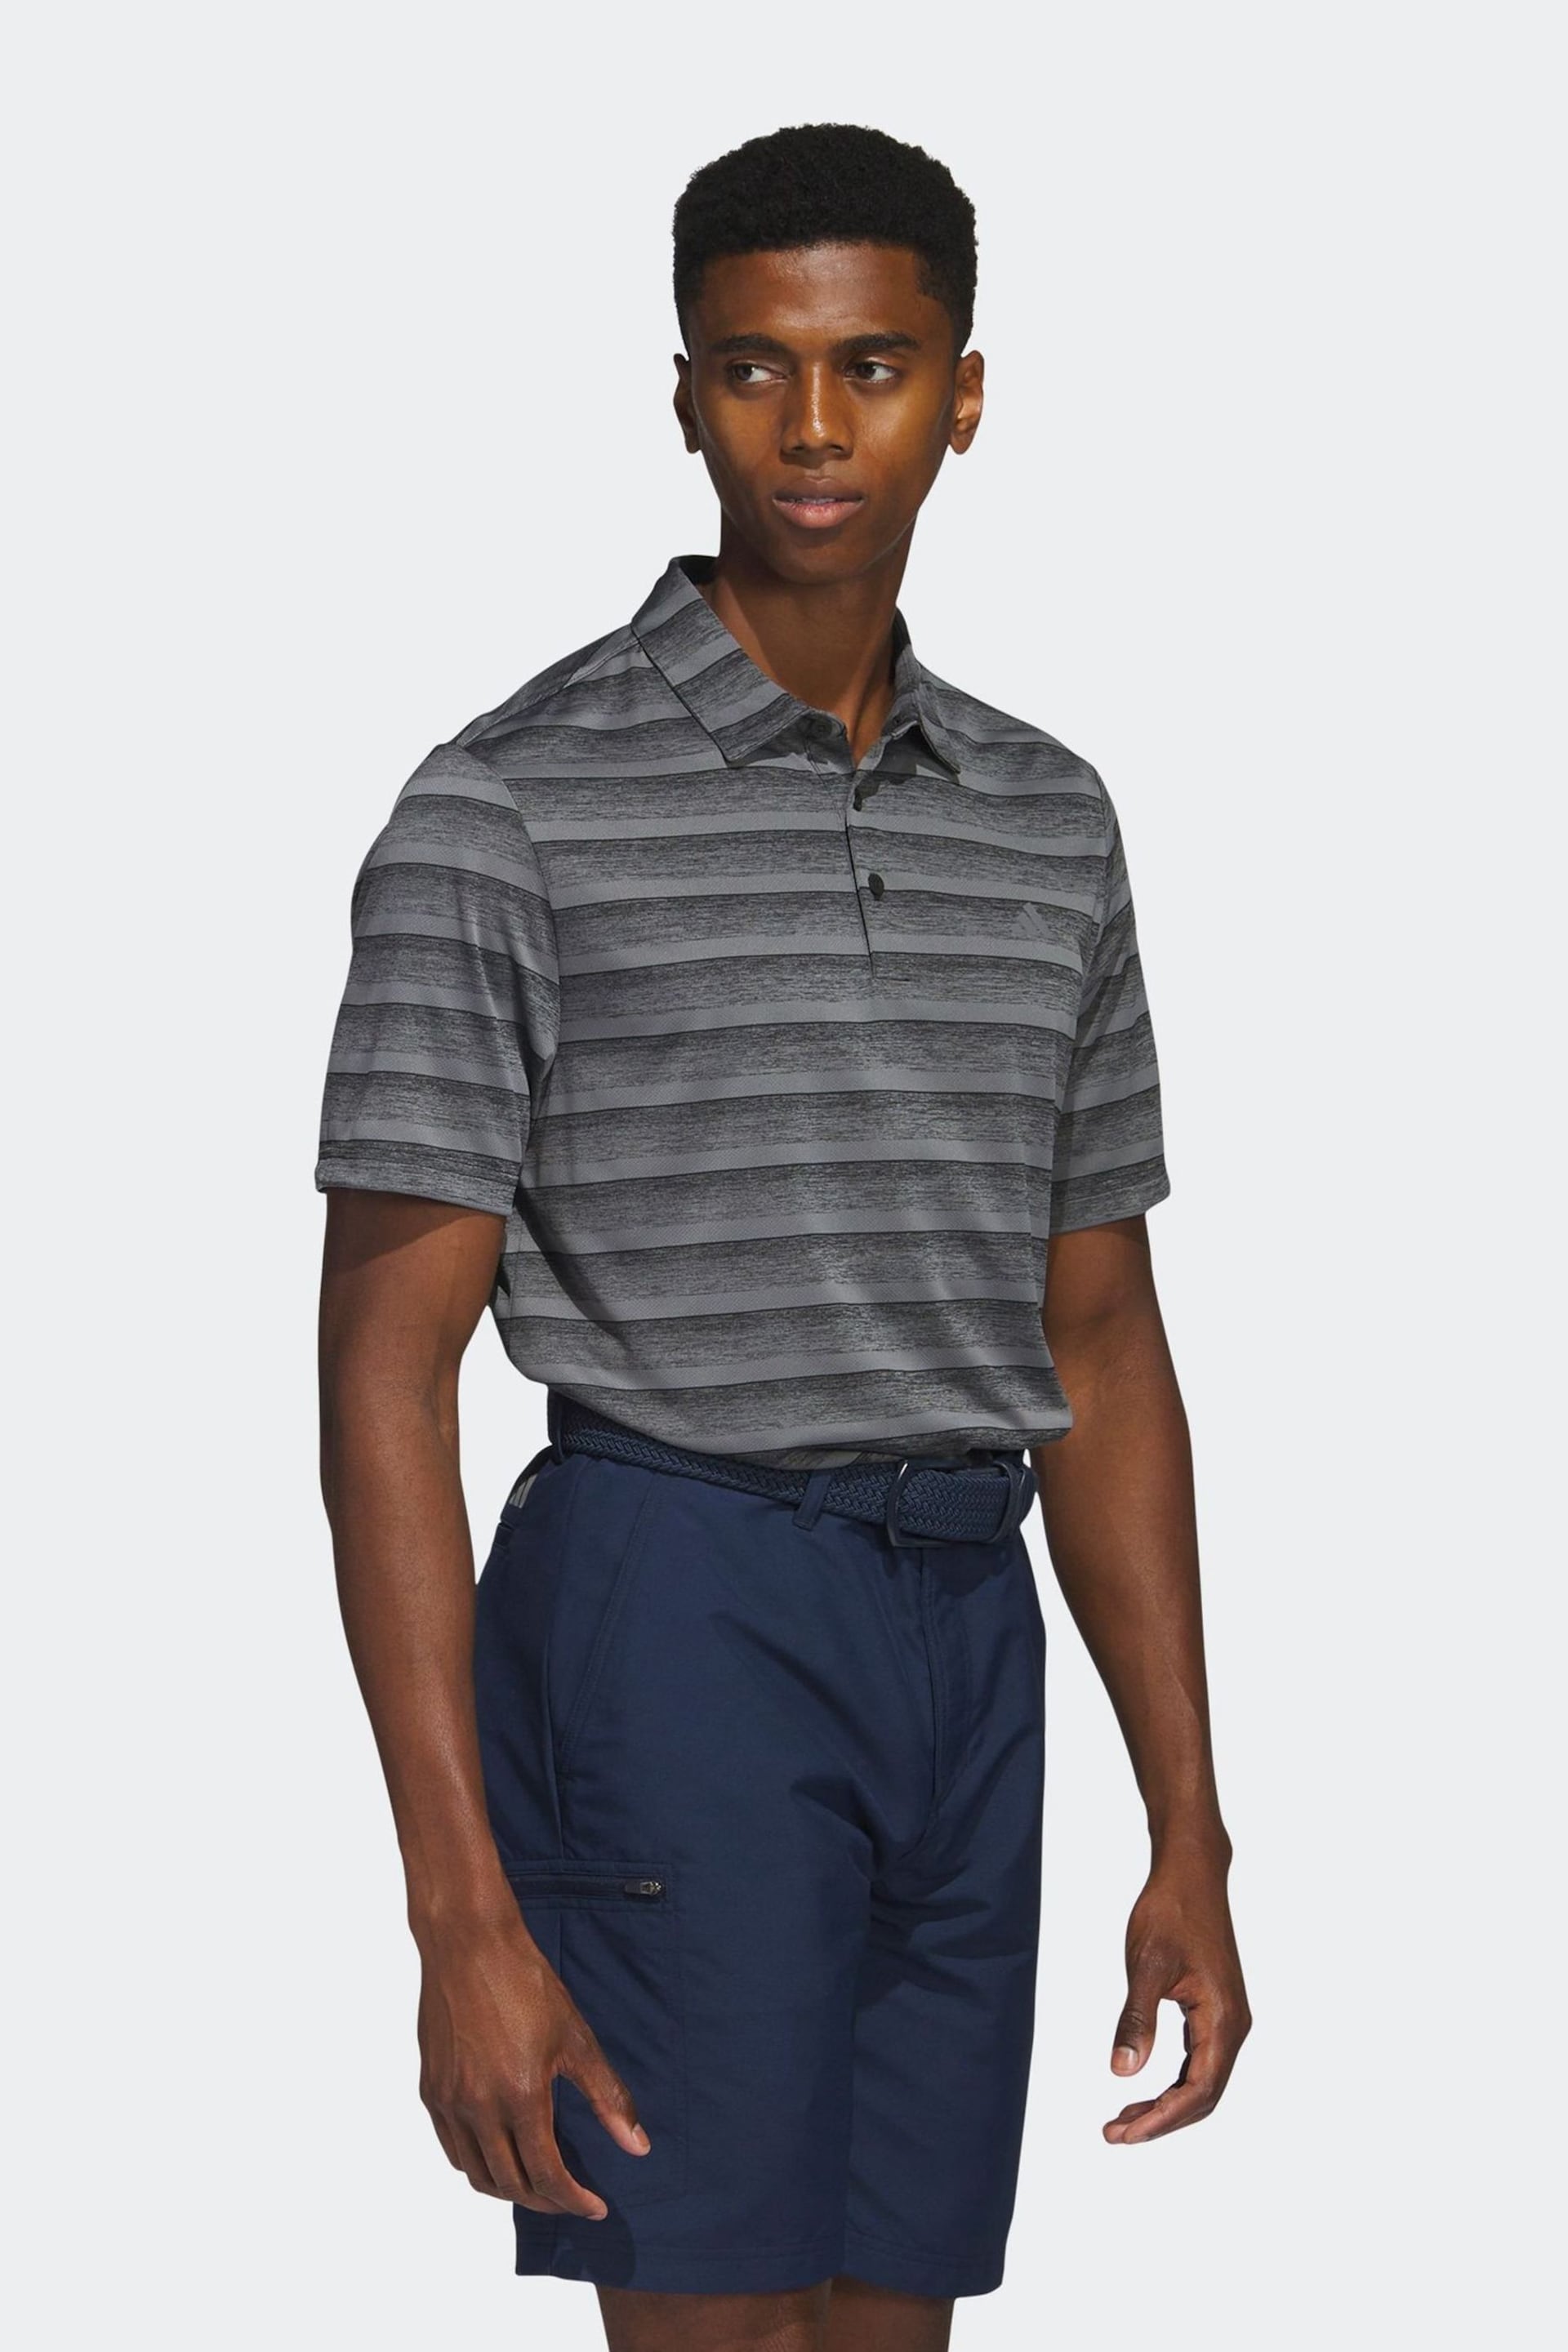 adidas Golf Two Colour Striped Polo Shirt - Image 3 of 5